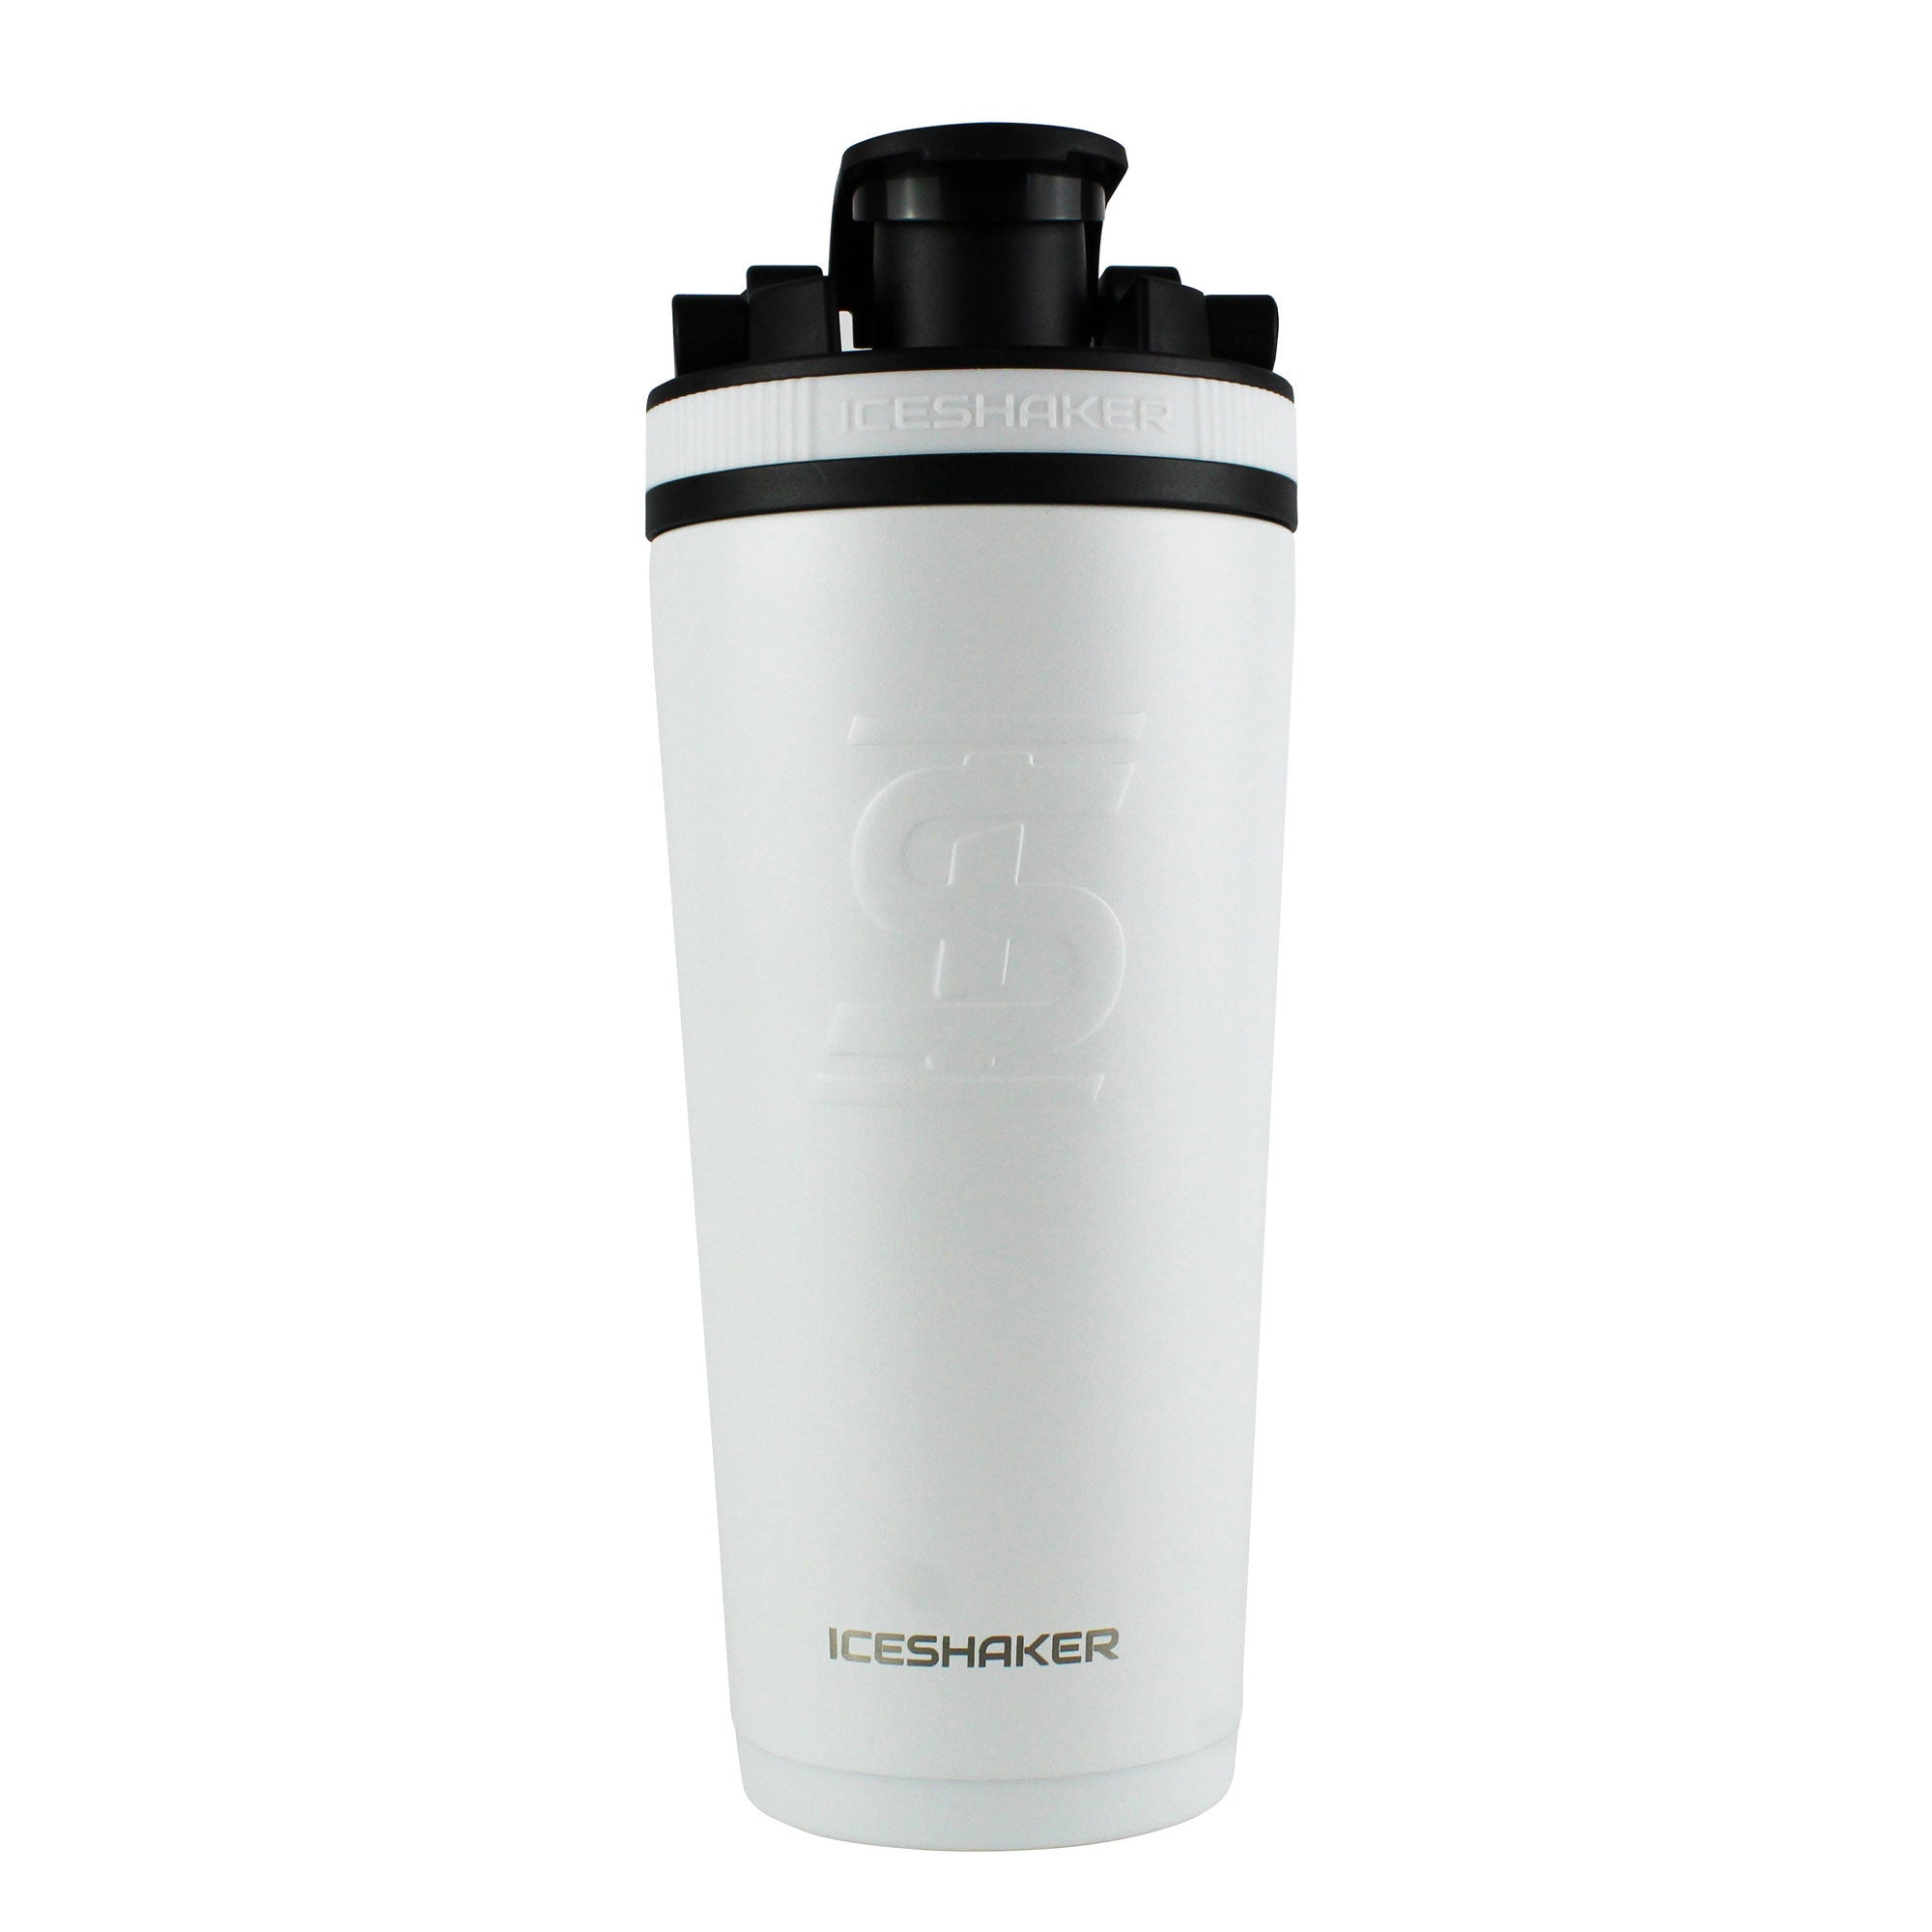 Officially Licensed Ohio State 26oz Ice Shaker - White